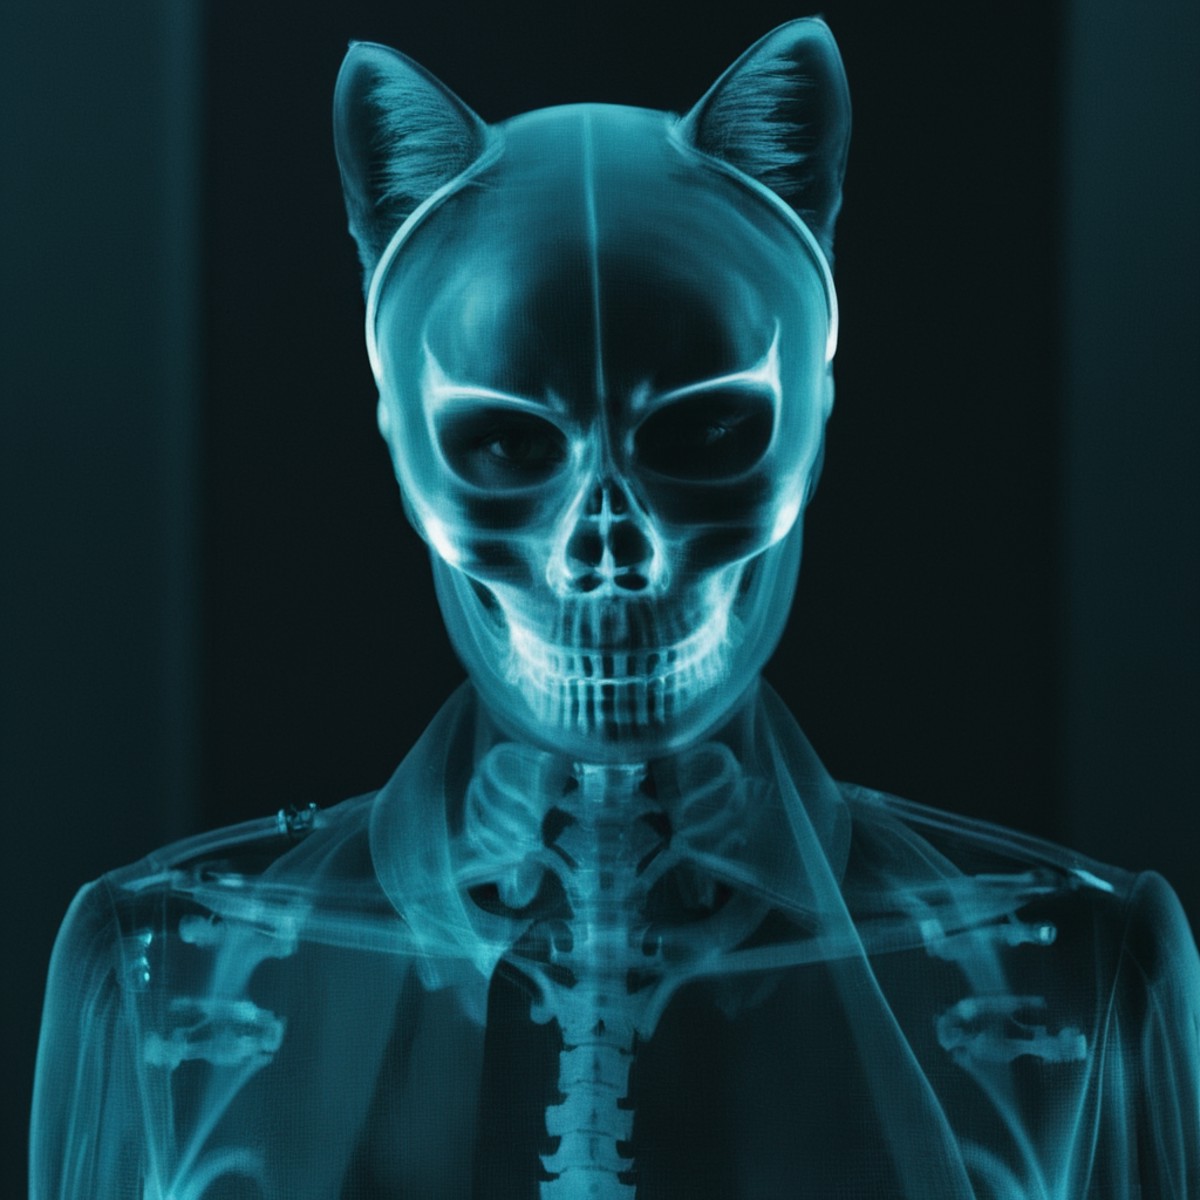 cinematic film still of  <lora:x-ray style:1>
portrait Skeleton of catwoman looking at camera
x-ray style